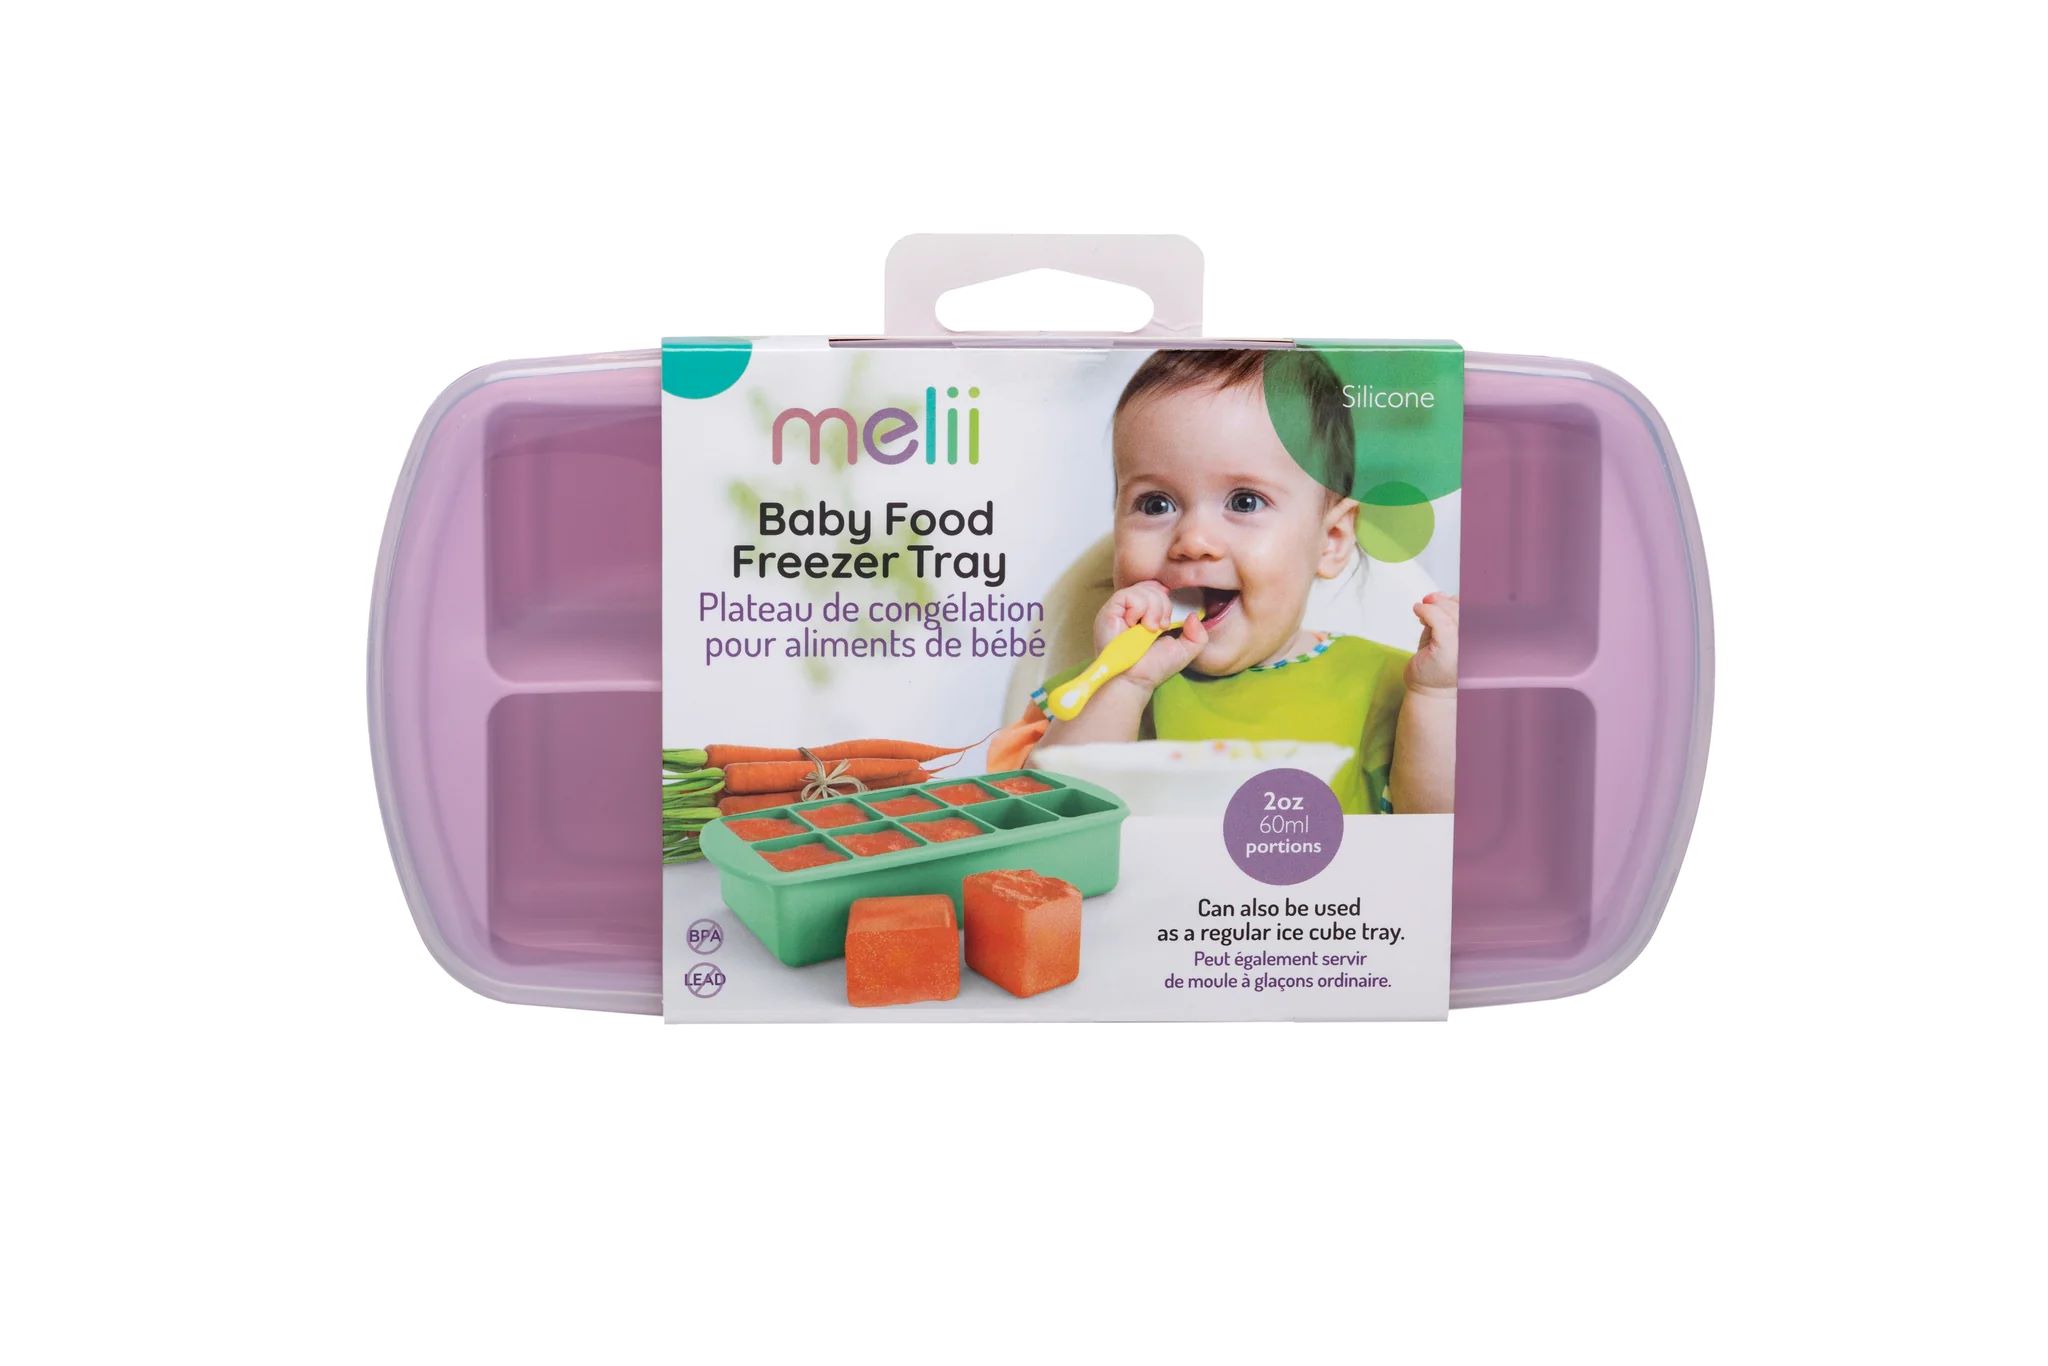 Review: Baby Food Freezer Tray – Convenient and Practical